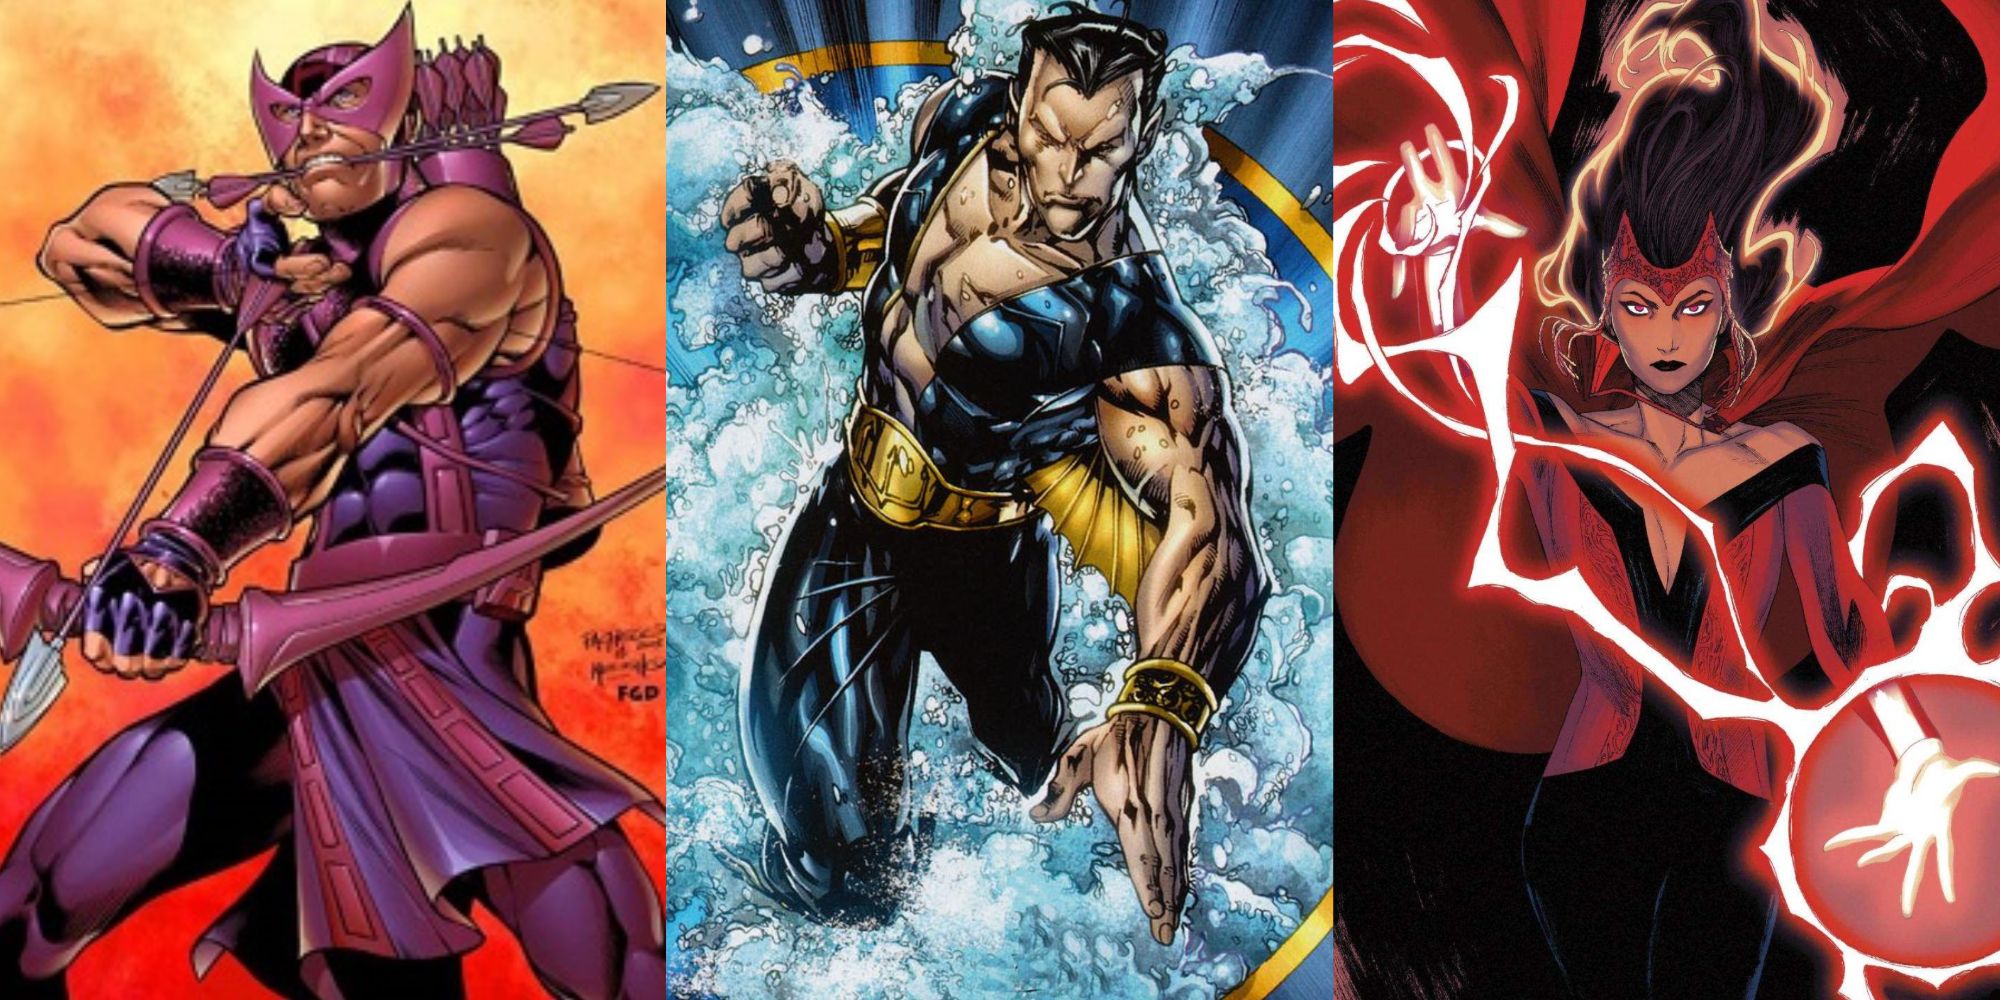 Left to right: Hawkeye, Namor, and Scarlet Witch